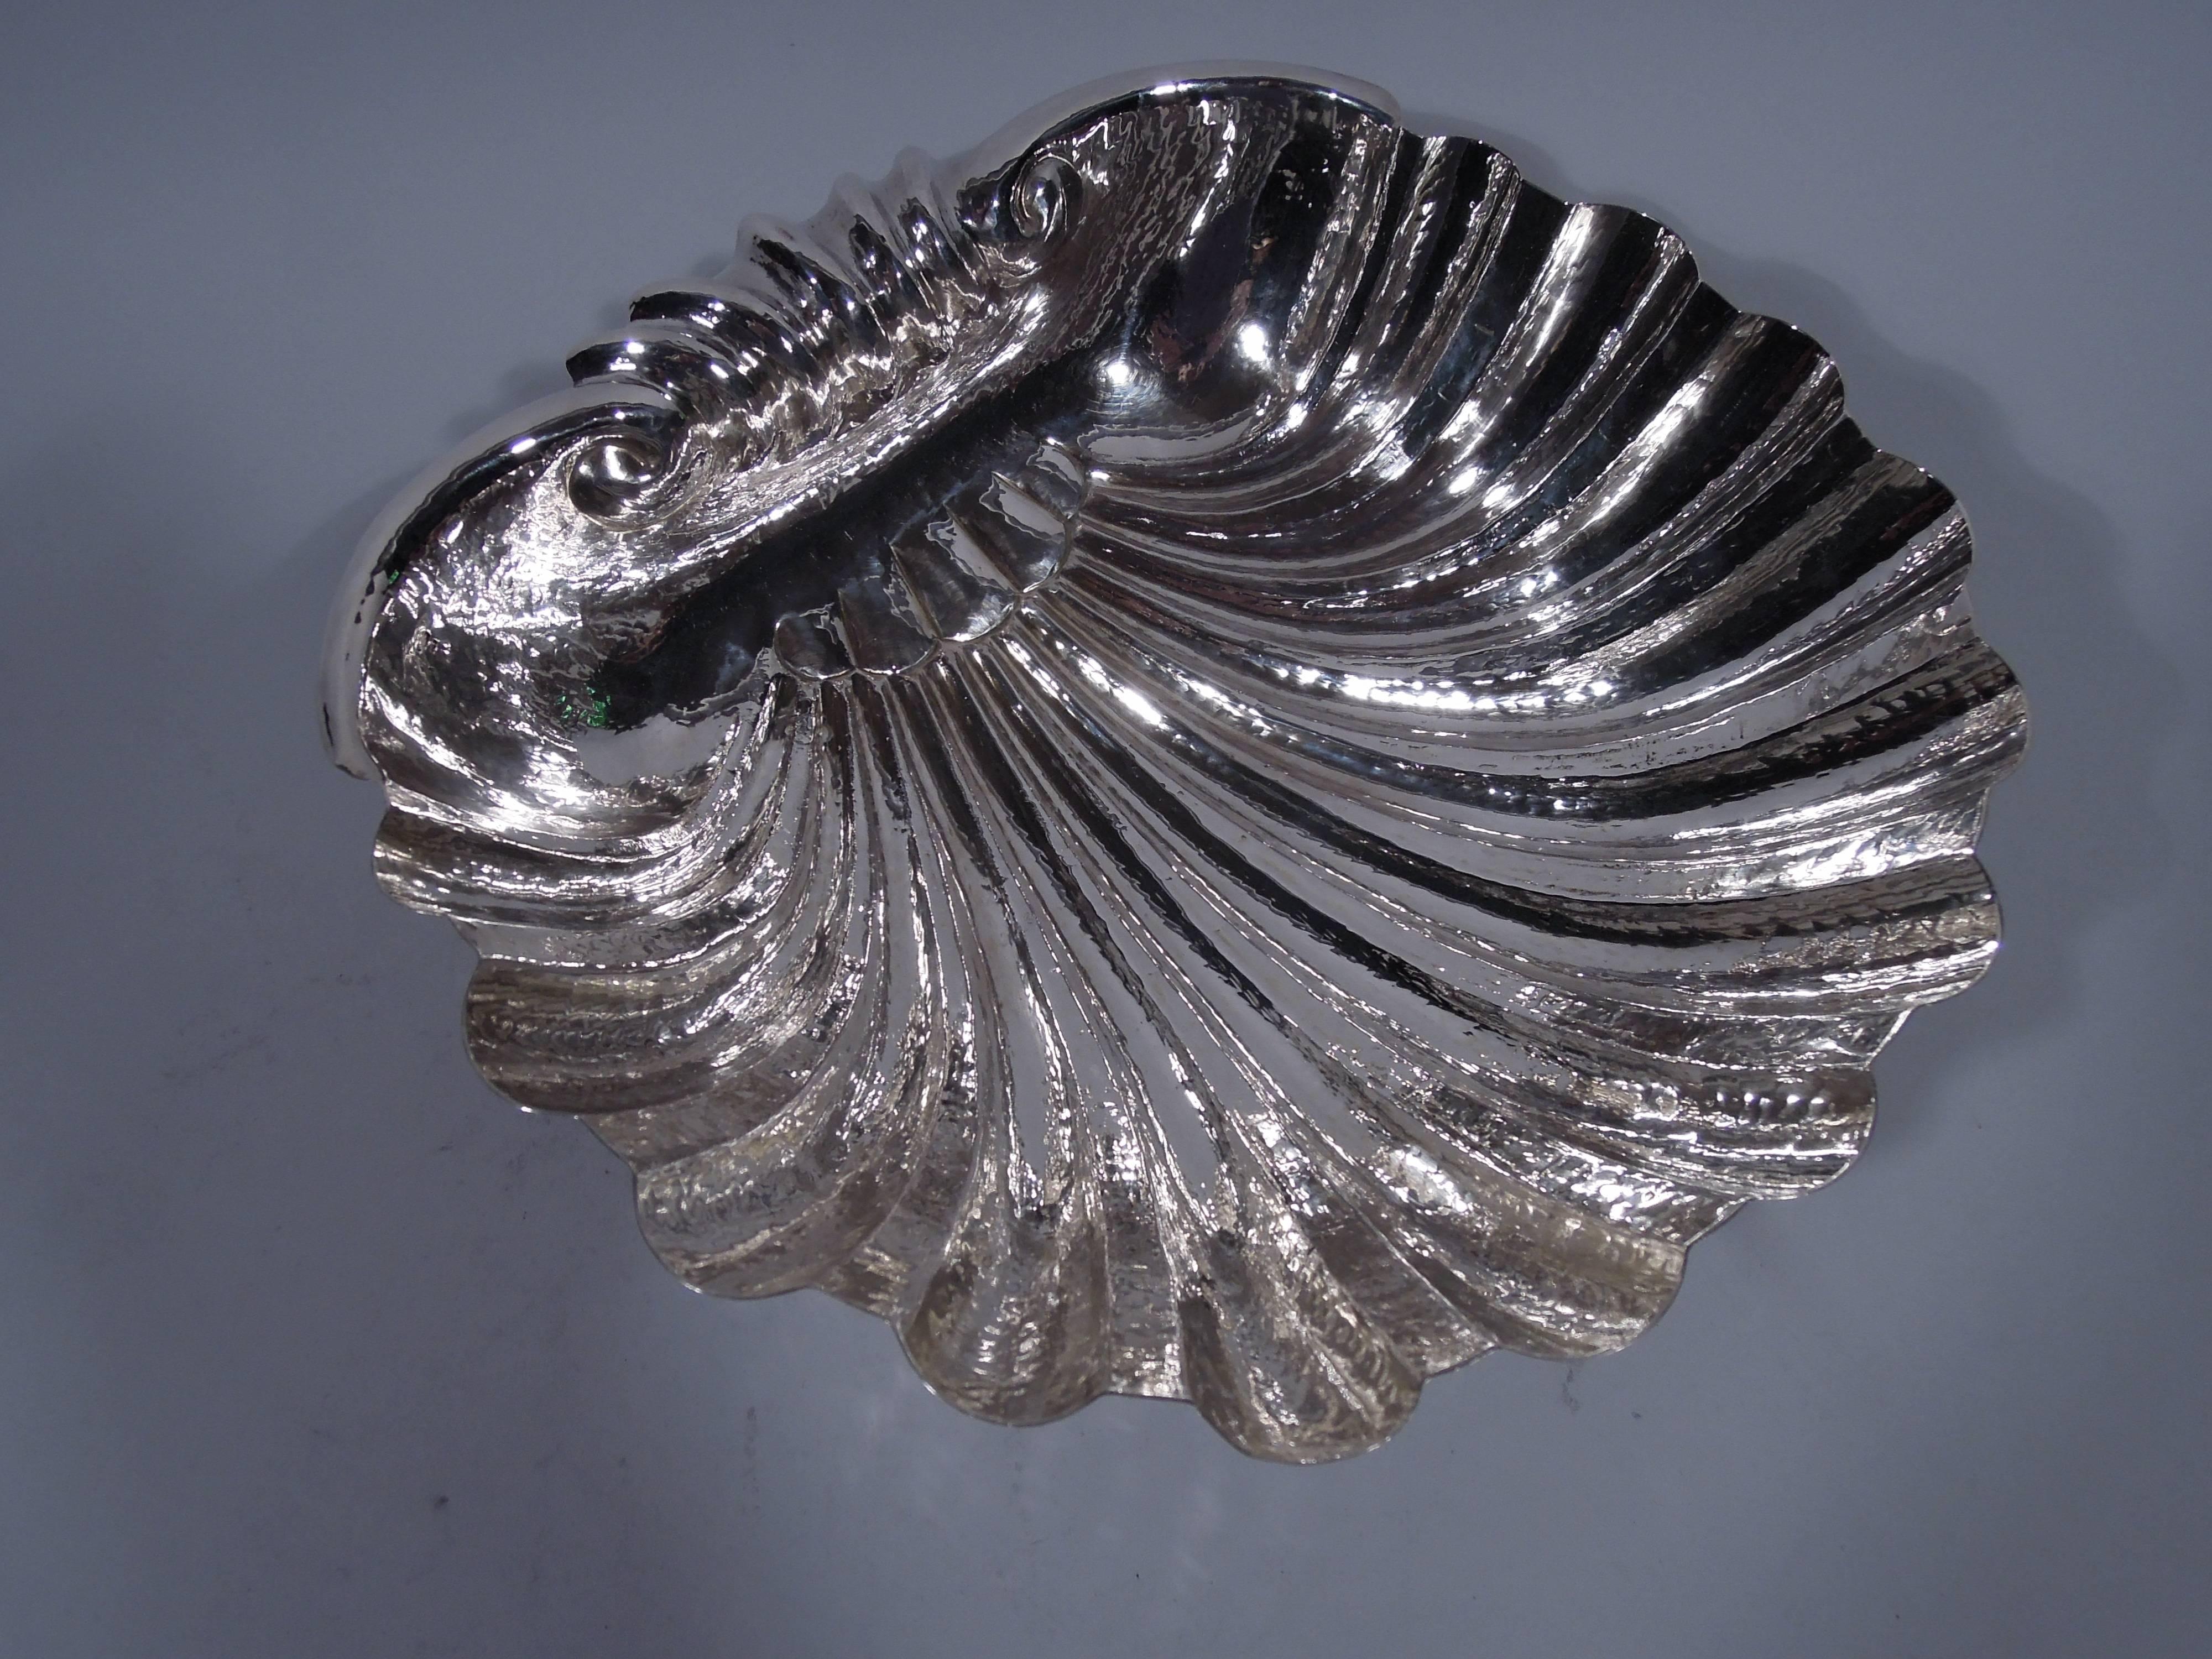 Sterling silver scallop shell bowl. Deep with flutes and curvilinear scalloped rim. Scrolled handle bordered by volute scrolls. Underside has incised hatching and three seashell supports. Unusual and textural with visible hand hammering. Hallmarked